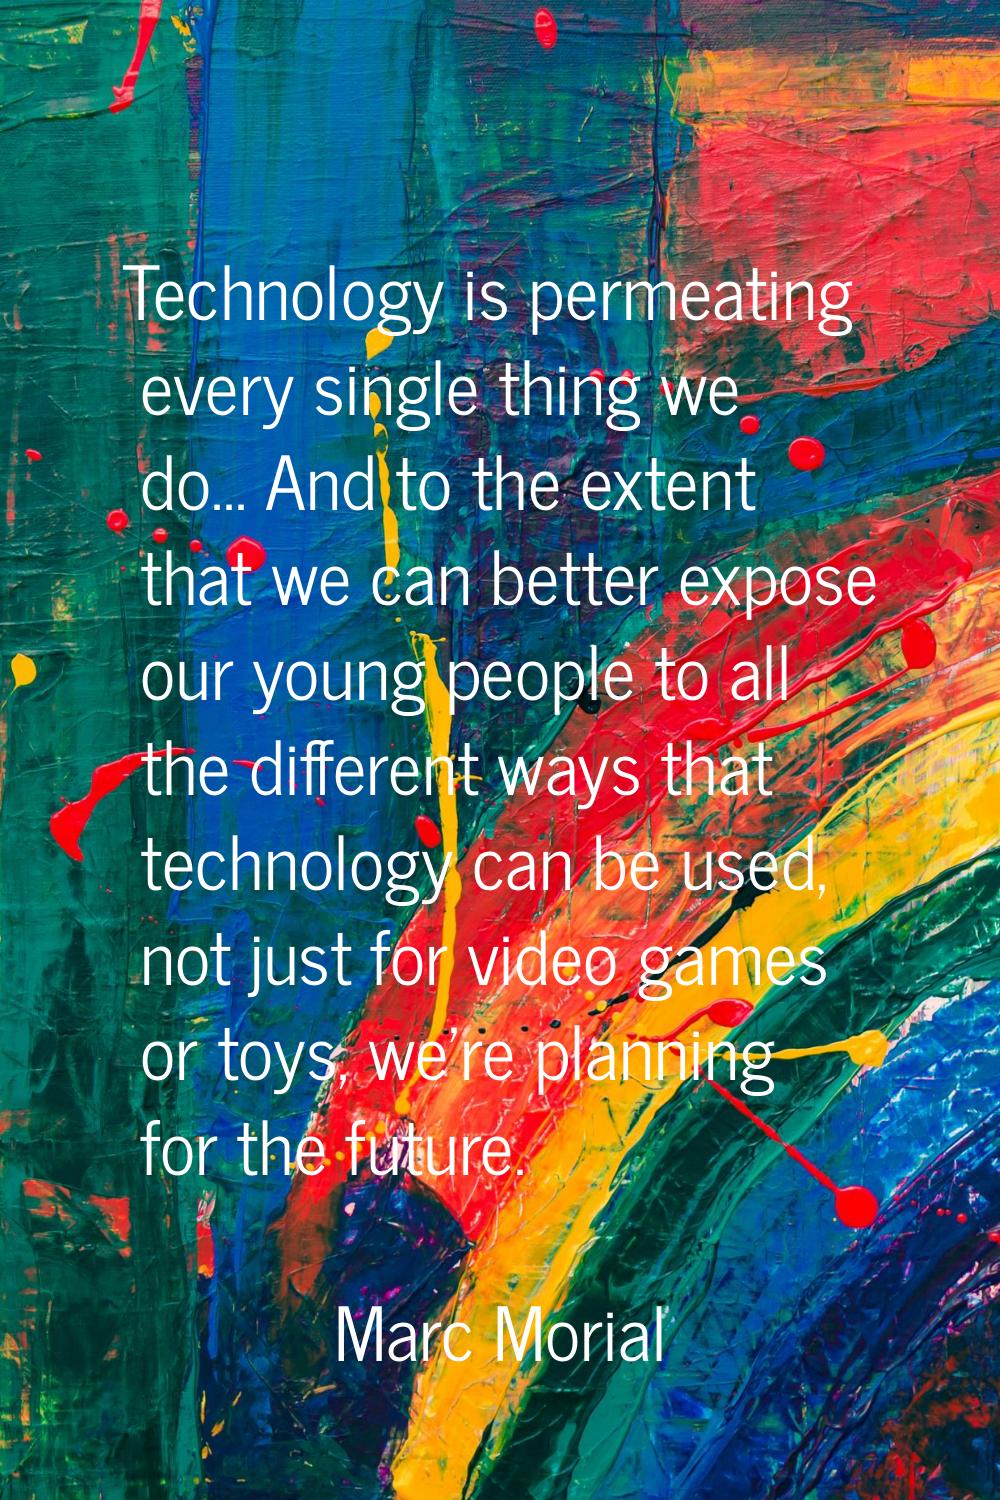 Technology is permeating every single thing we do... And to the extent that we can better expose ou